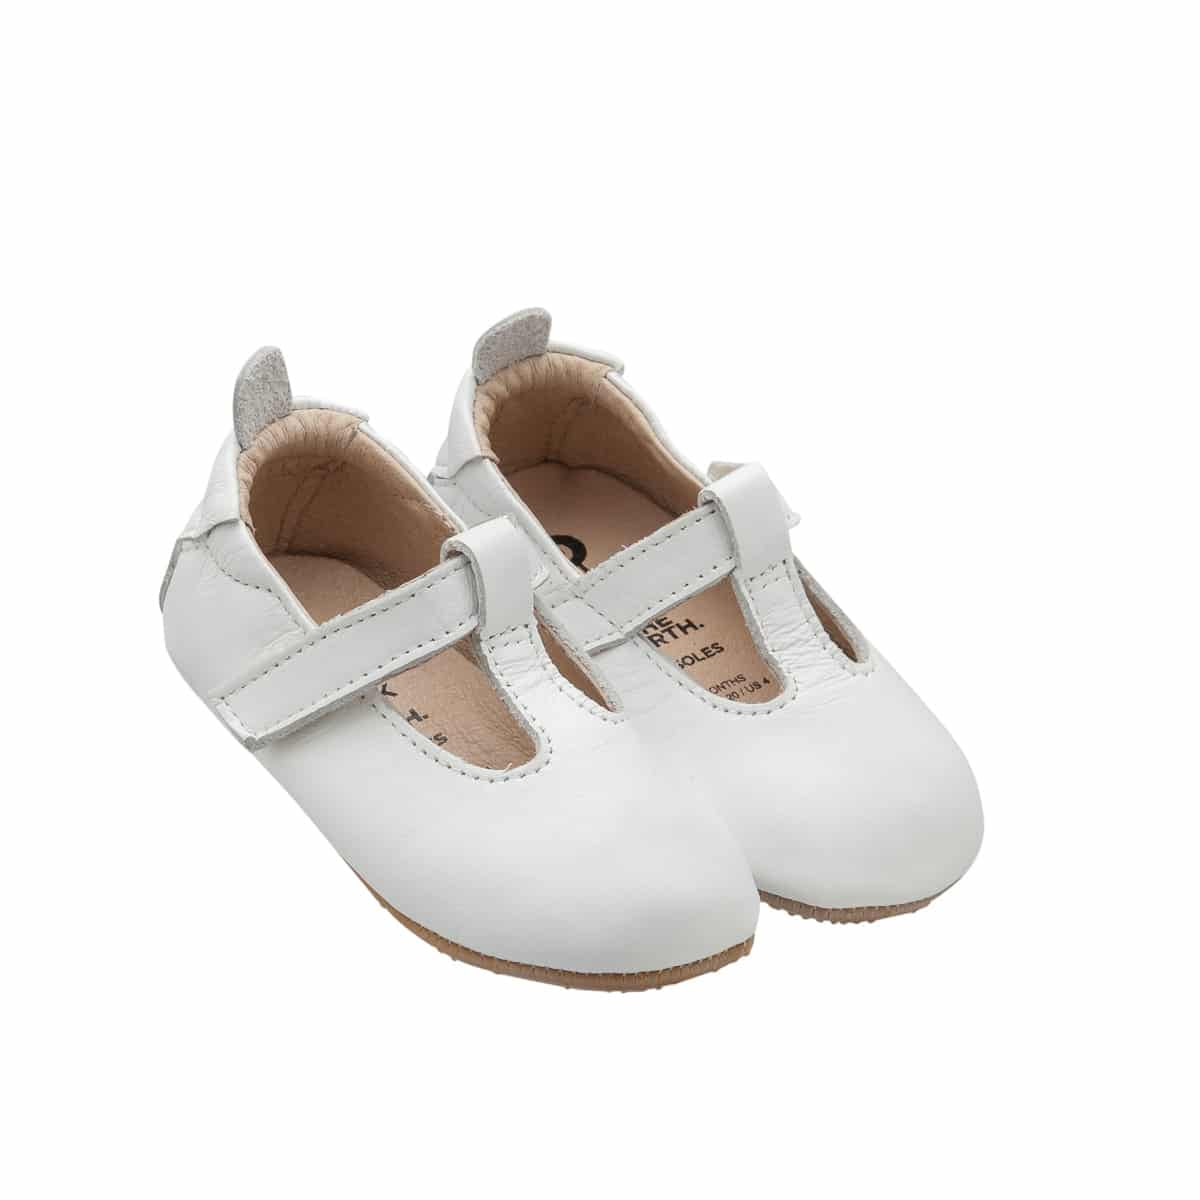 OHME BUB BABY SHOES